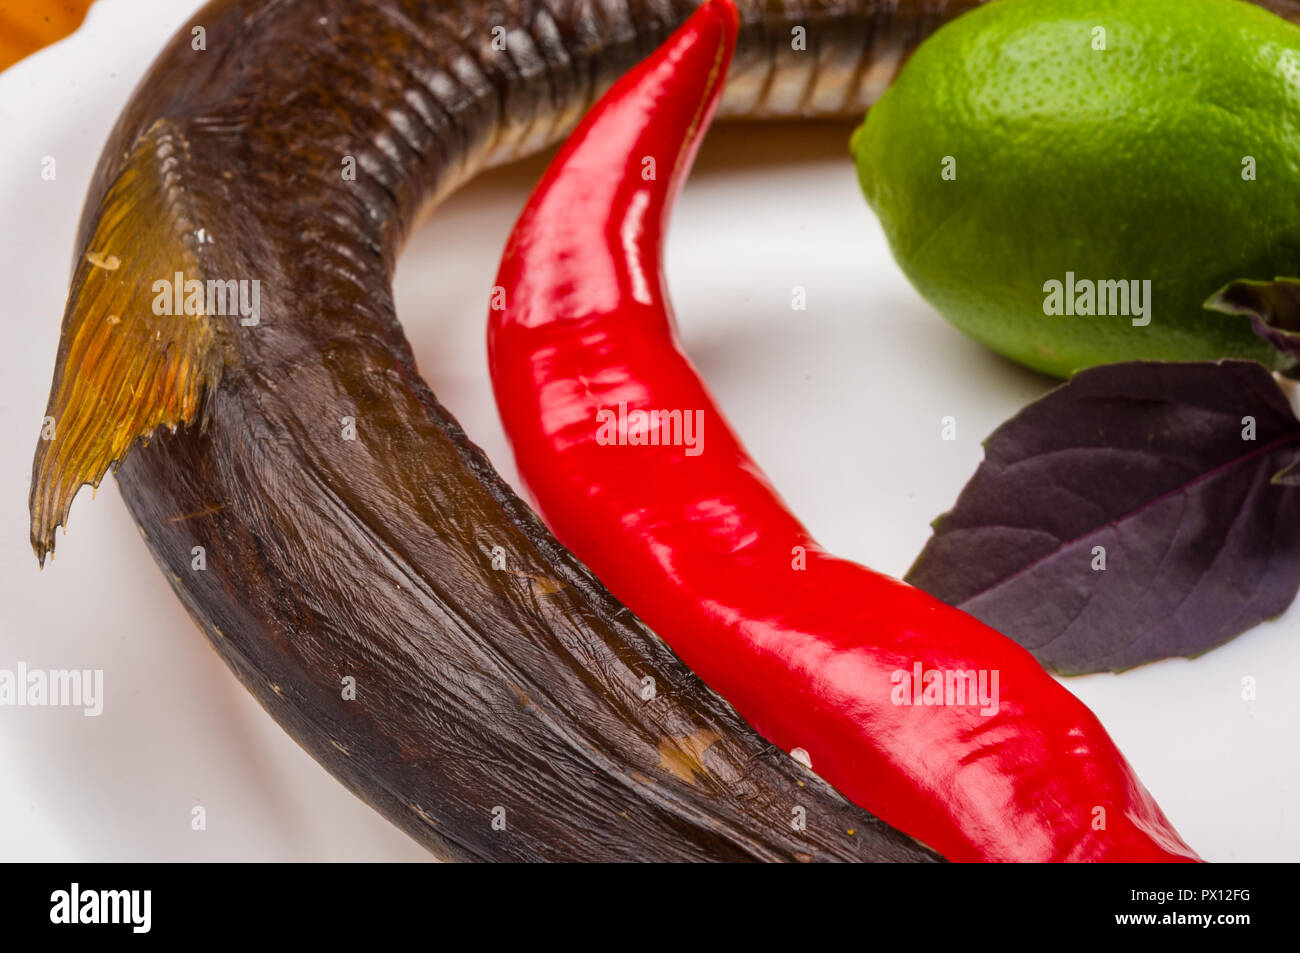 still life - smoked garfish with lime, Basil, green onions, chili, nori chips, spices, olive oil in a white ceramic dish, on a wooden table Stock Photo